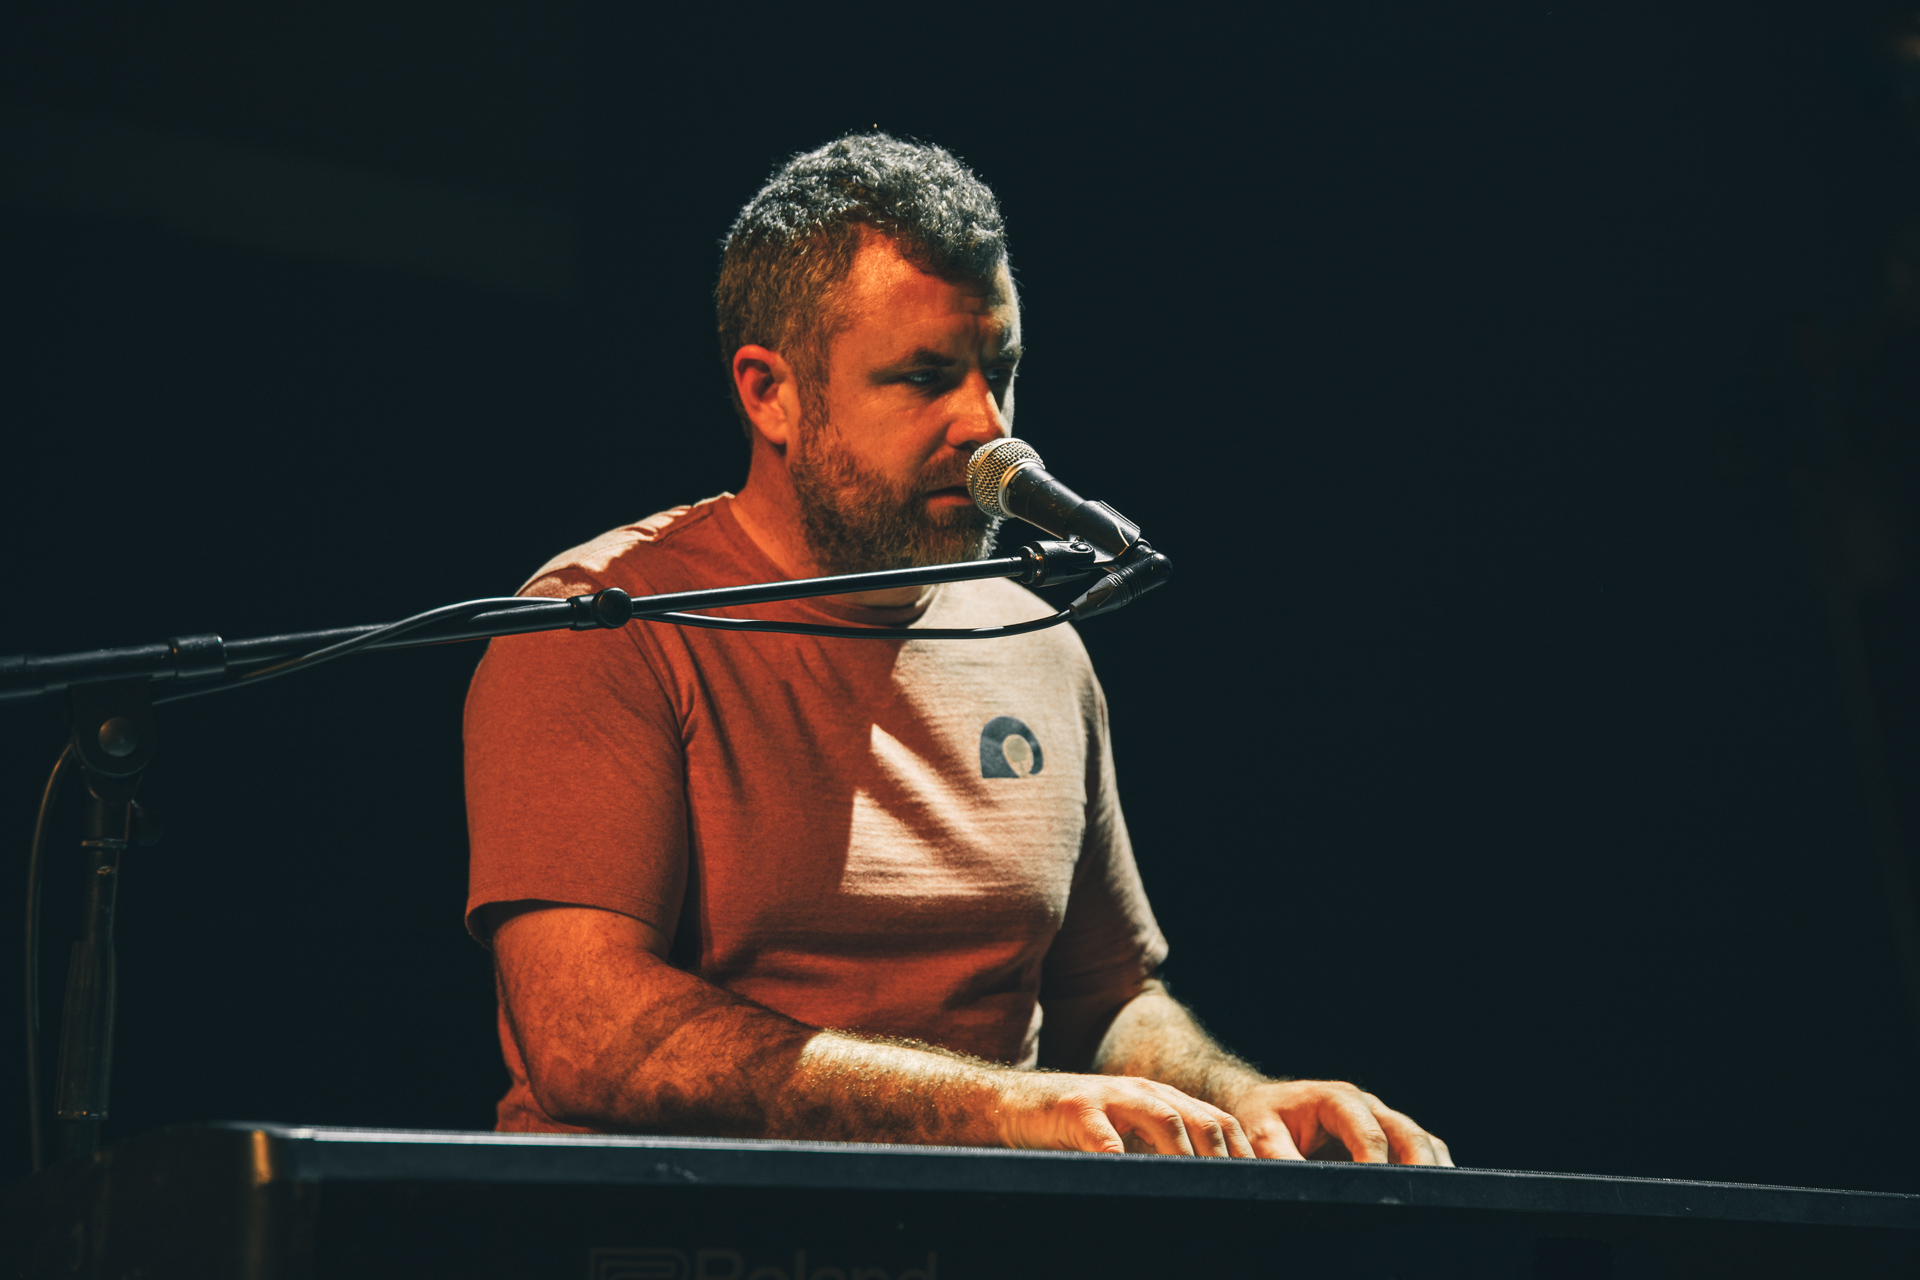 Mick Flannery Photo by Matthijs van der Ven for The Influences 5044